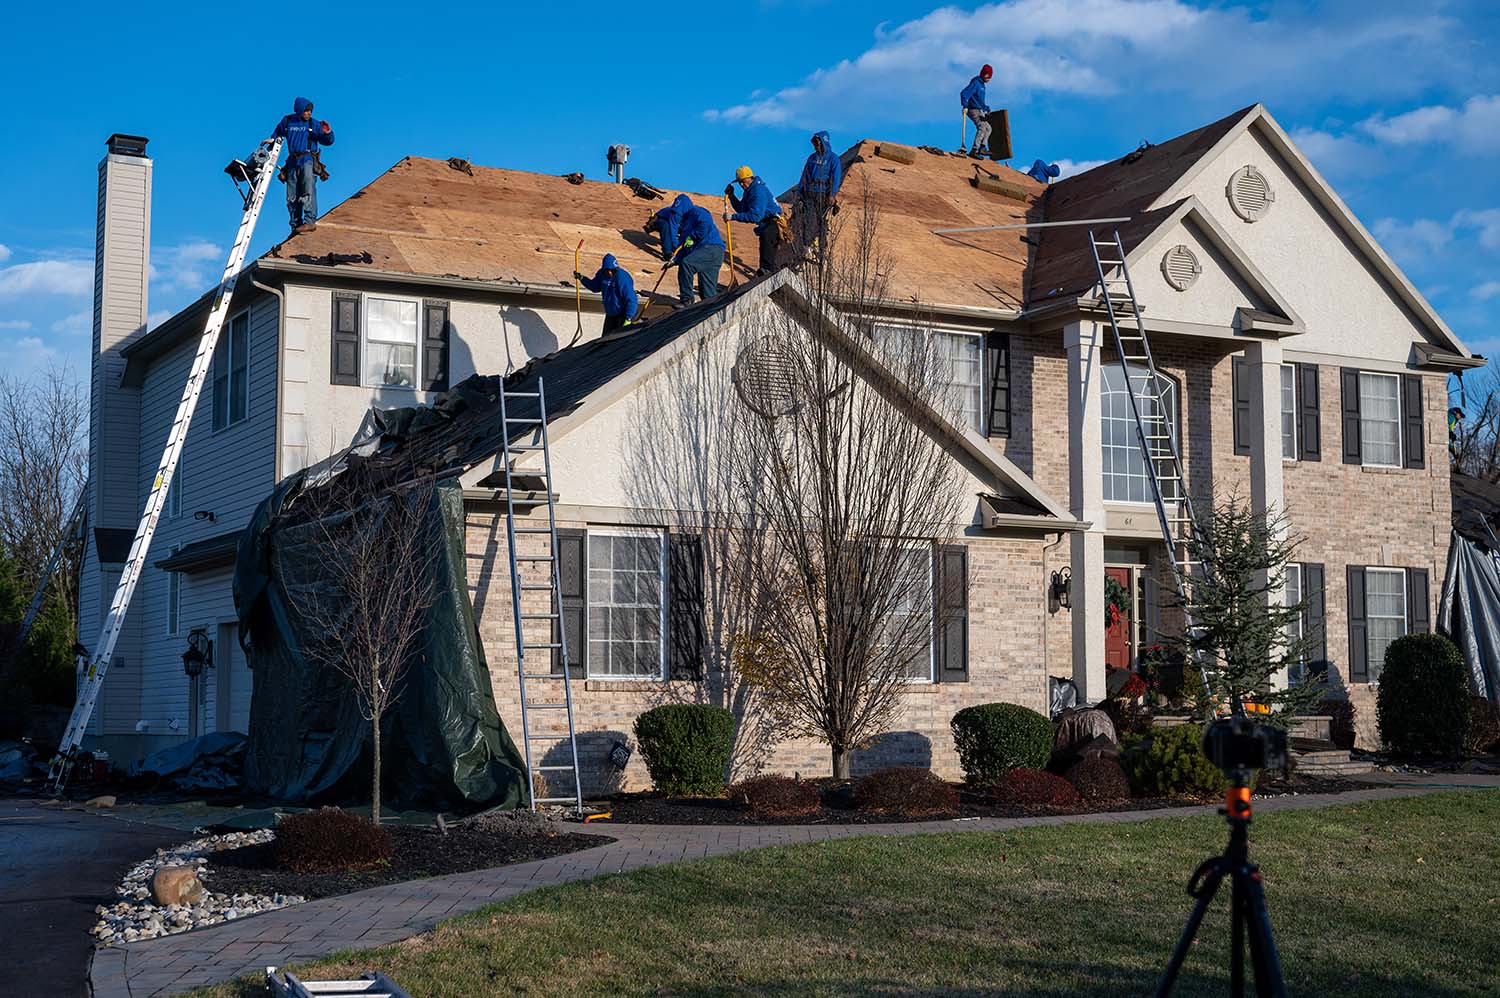 Roofing repair company - residential roofing contractors in Hillsdale (medium image)